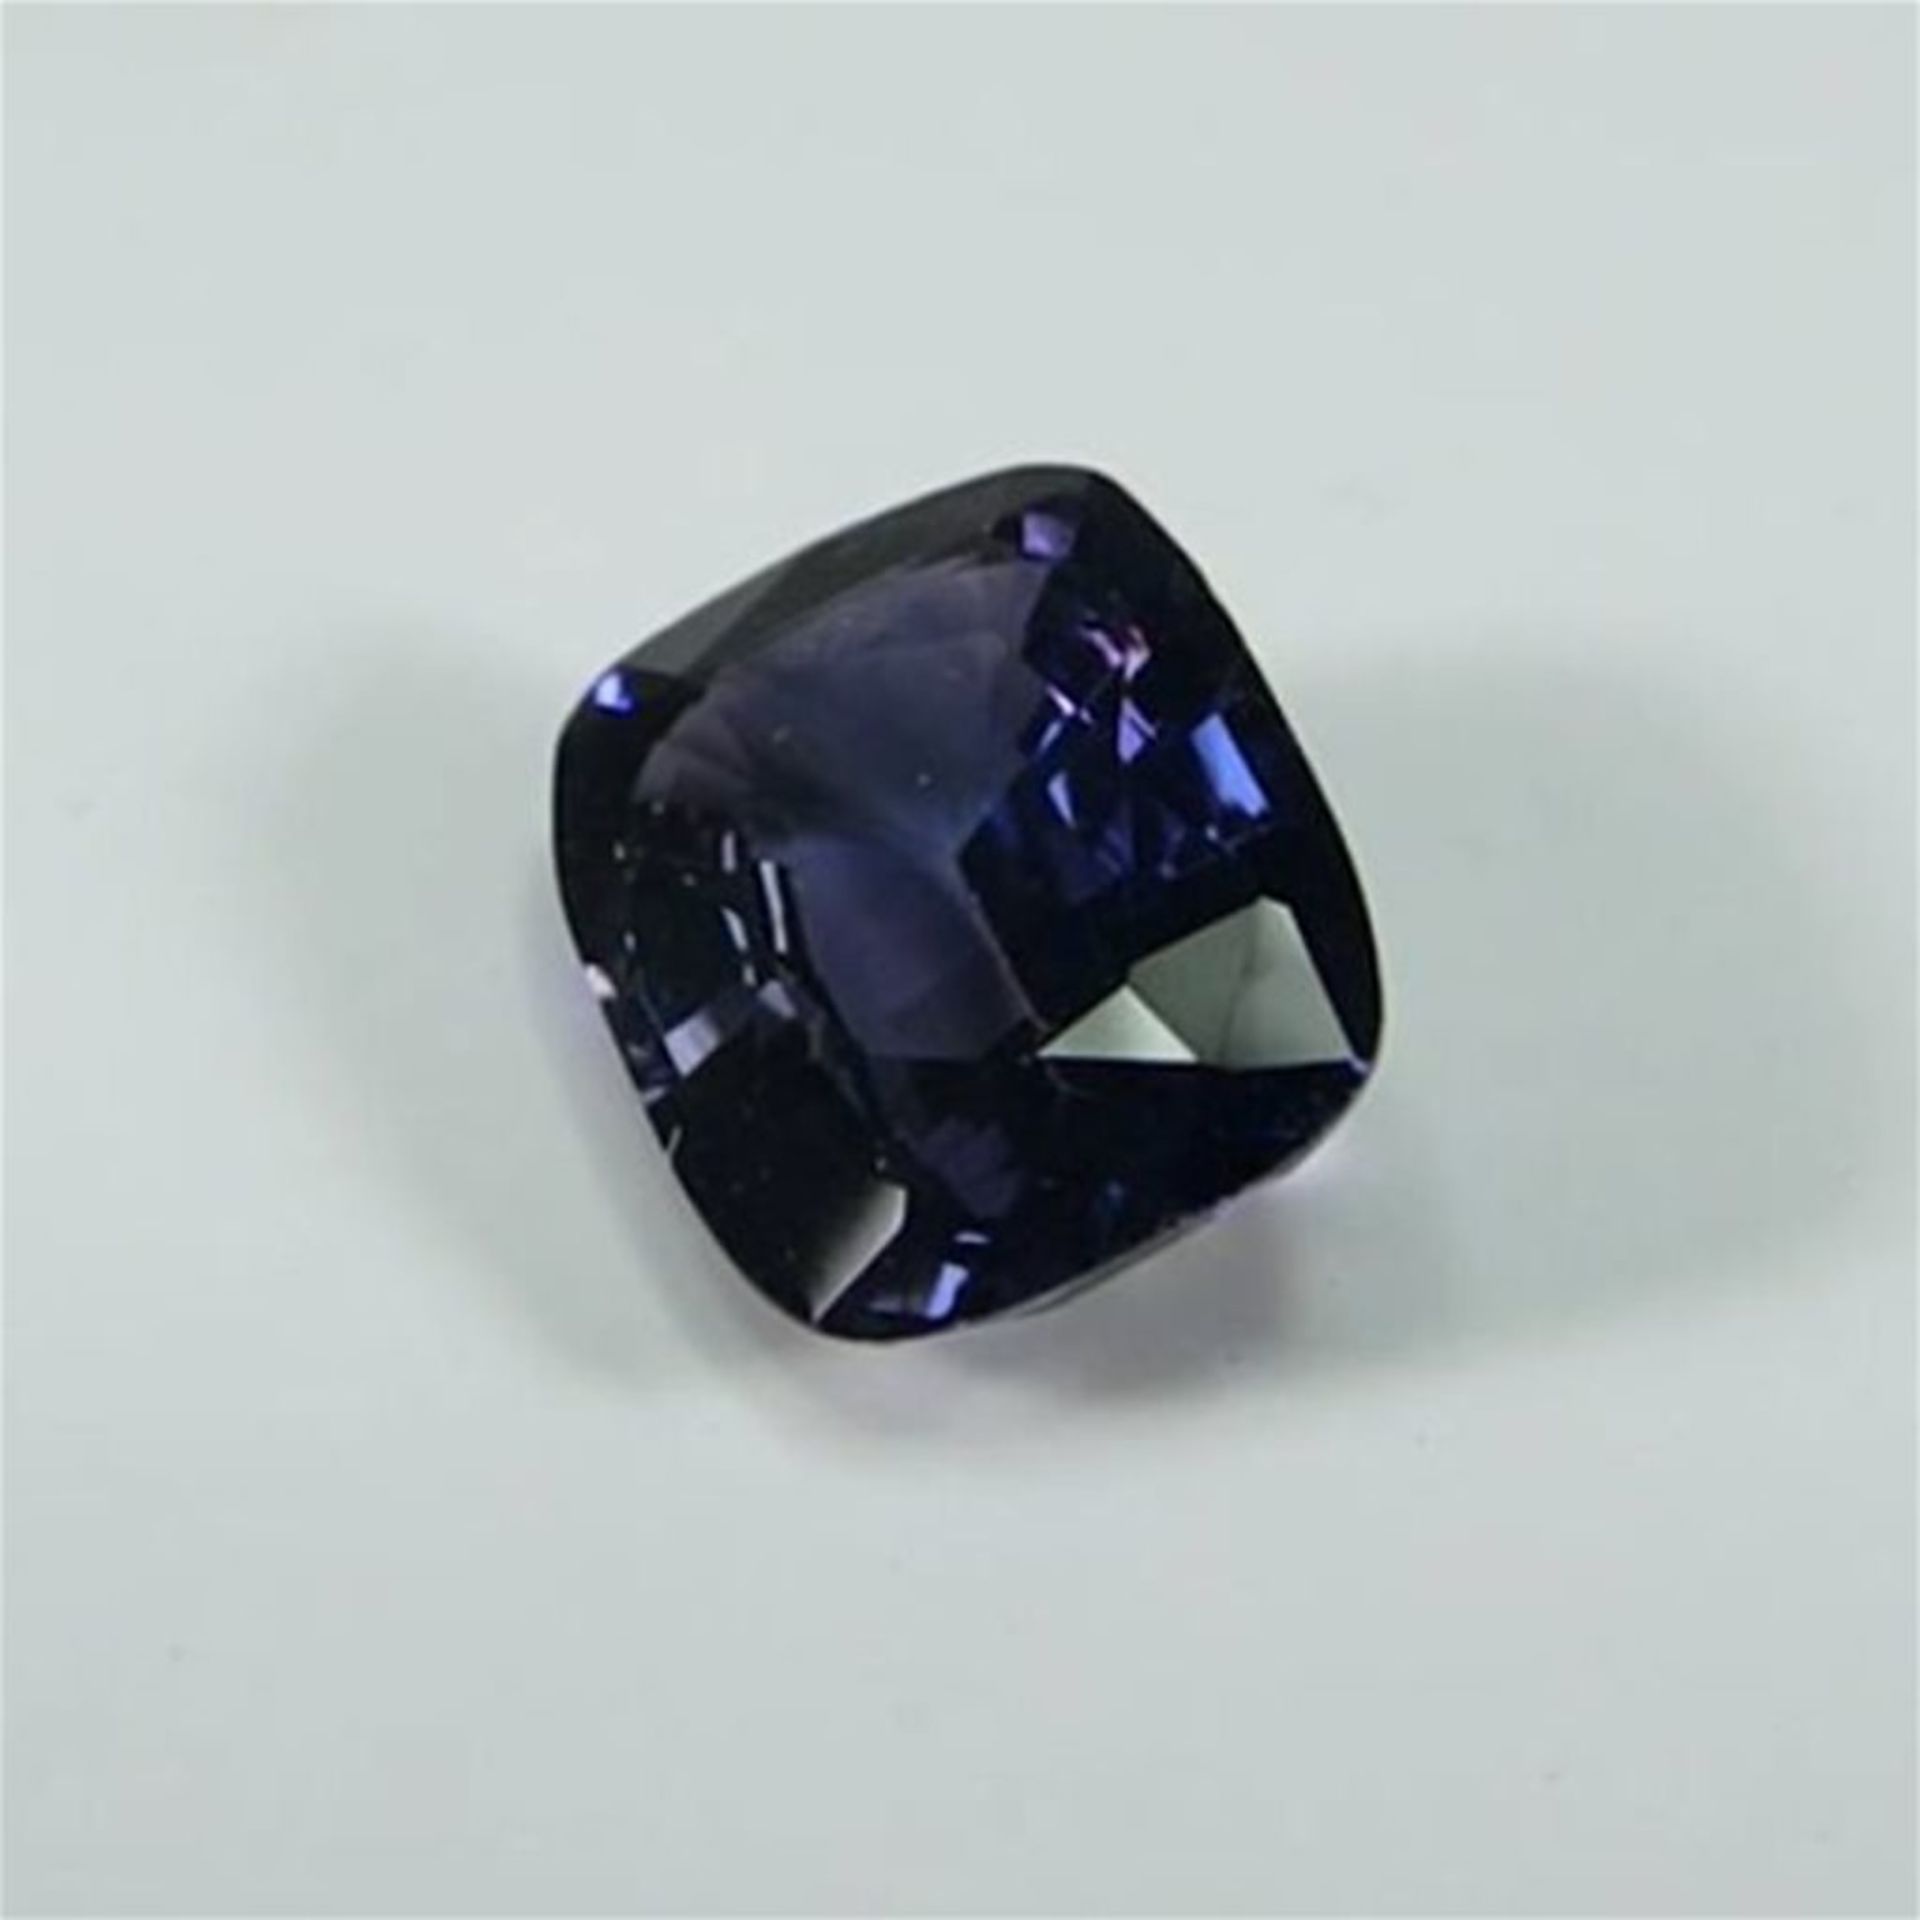 GIA Certified 2.90 ct. Bluish Violet Sapphire MADAGASCAR - Image 8 of 10